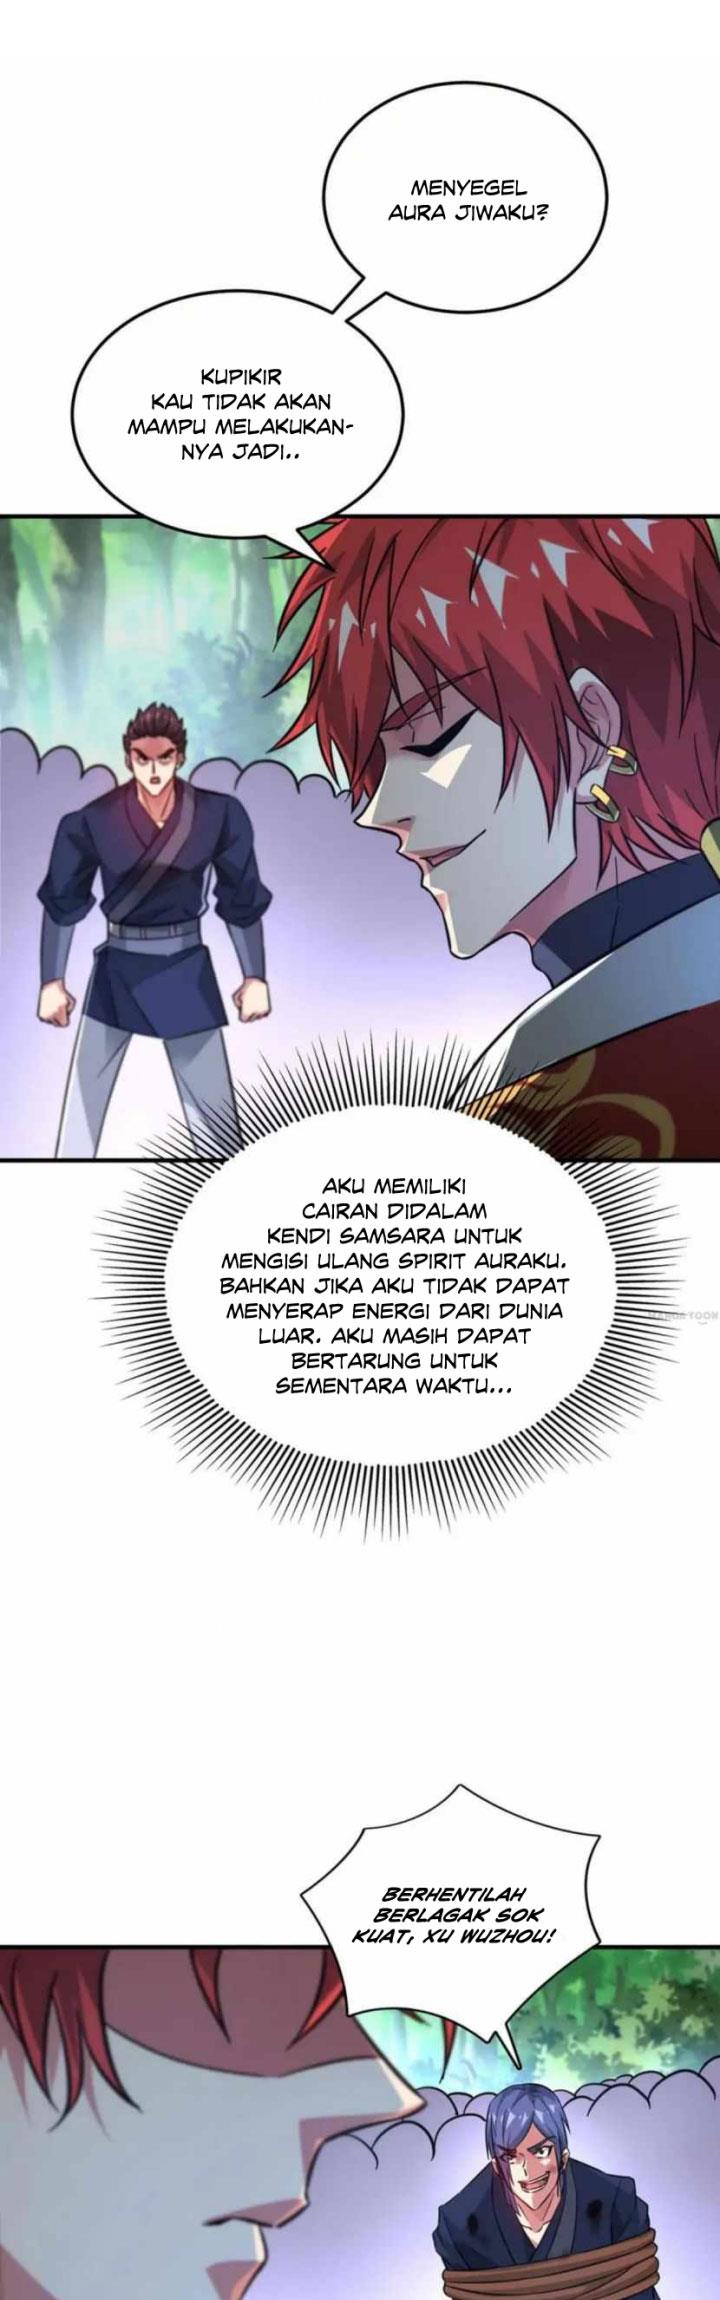 The First Son-In-Law Vanguard of All Time Chapter 229